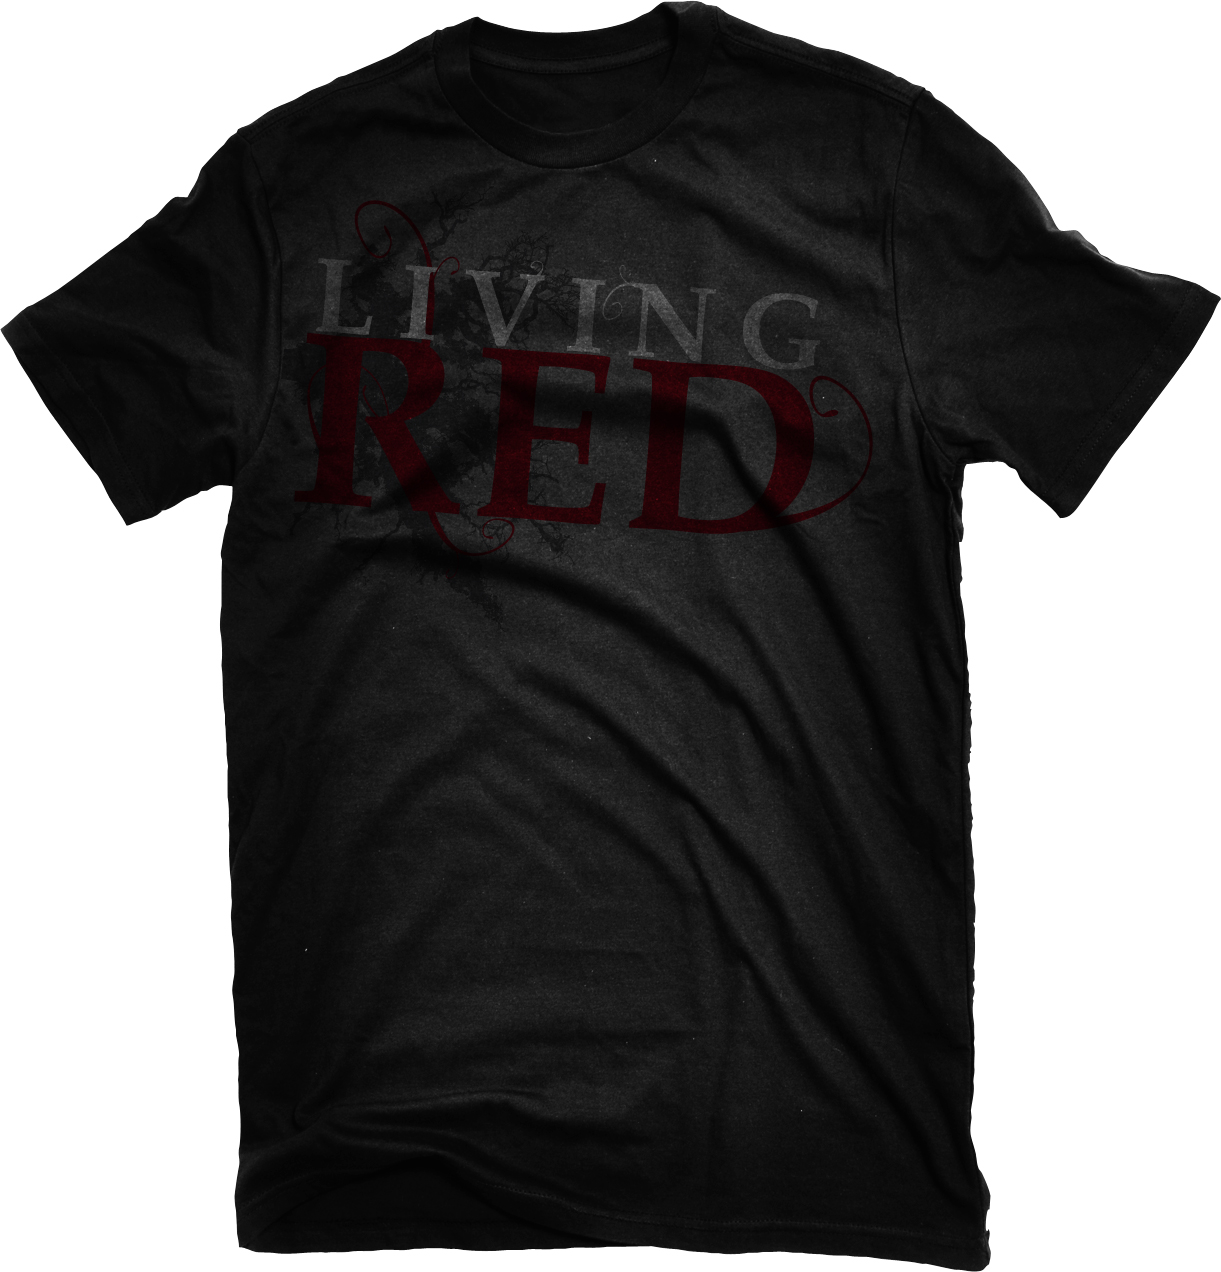 Living Red Shirts on SALE ($10)